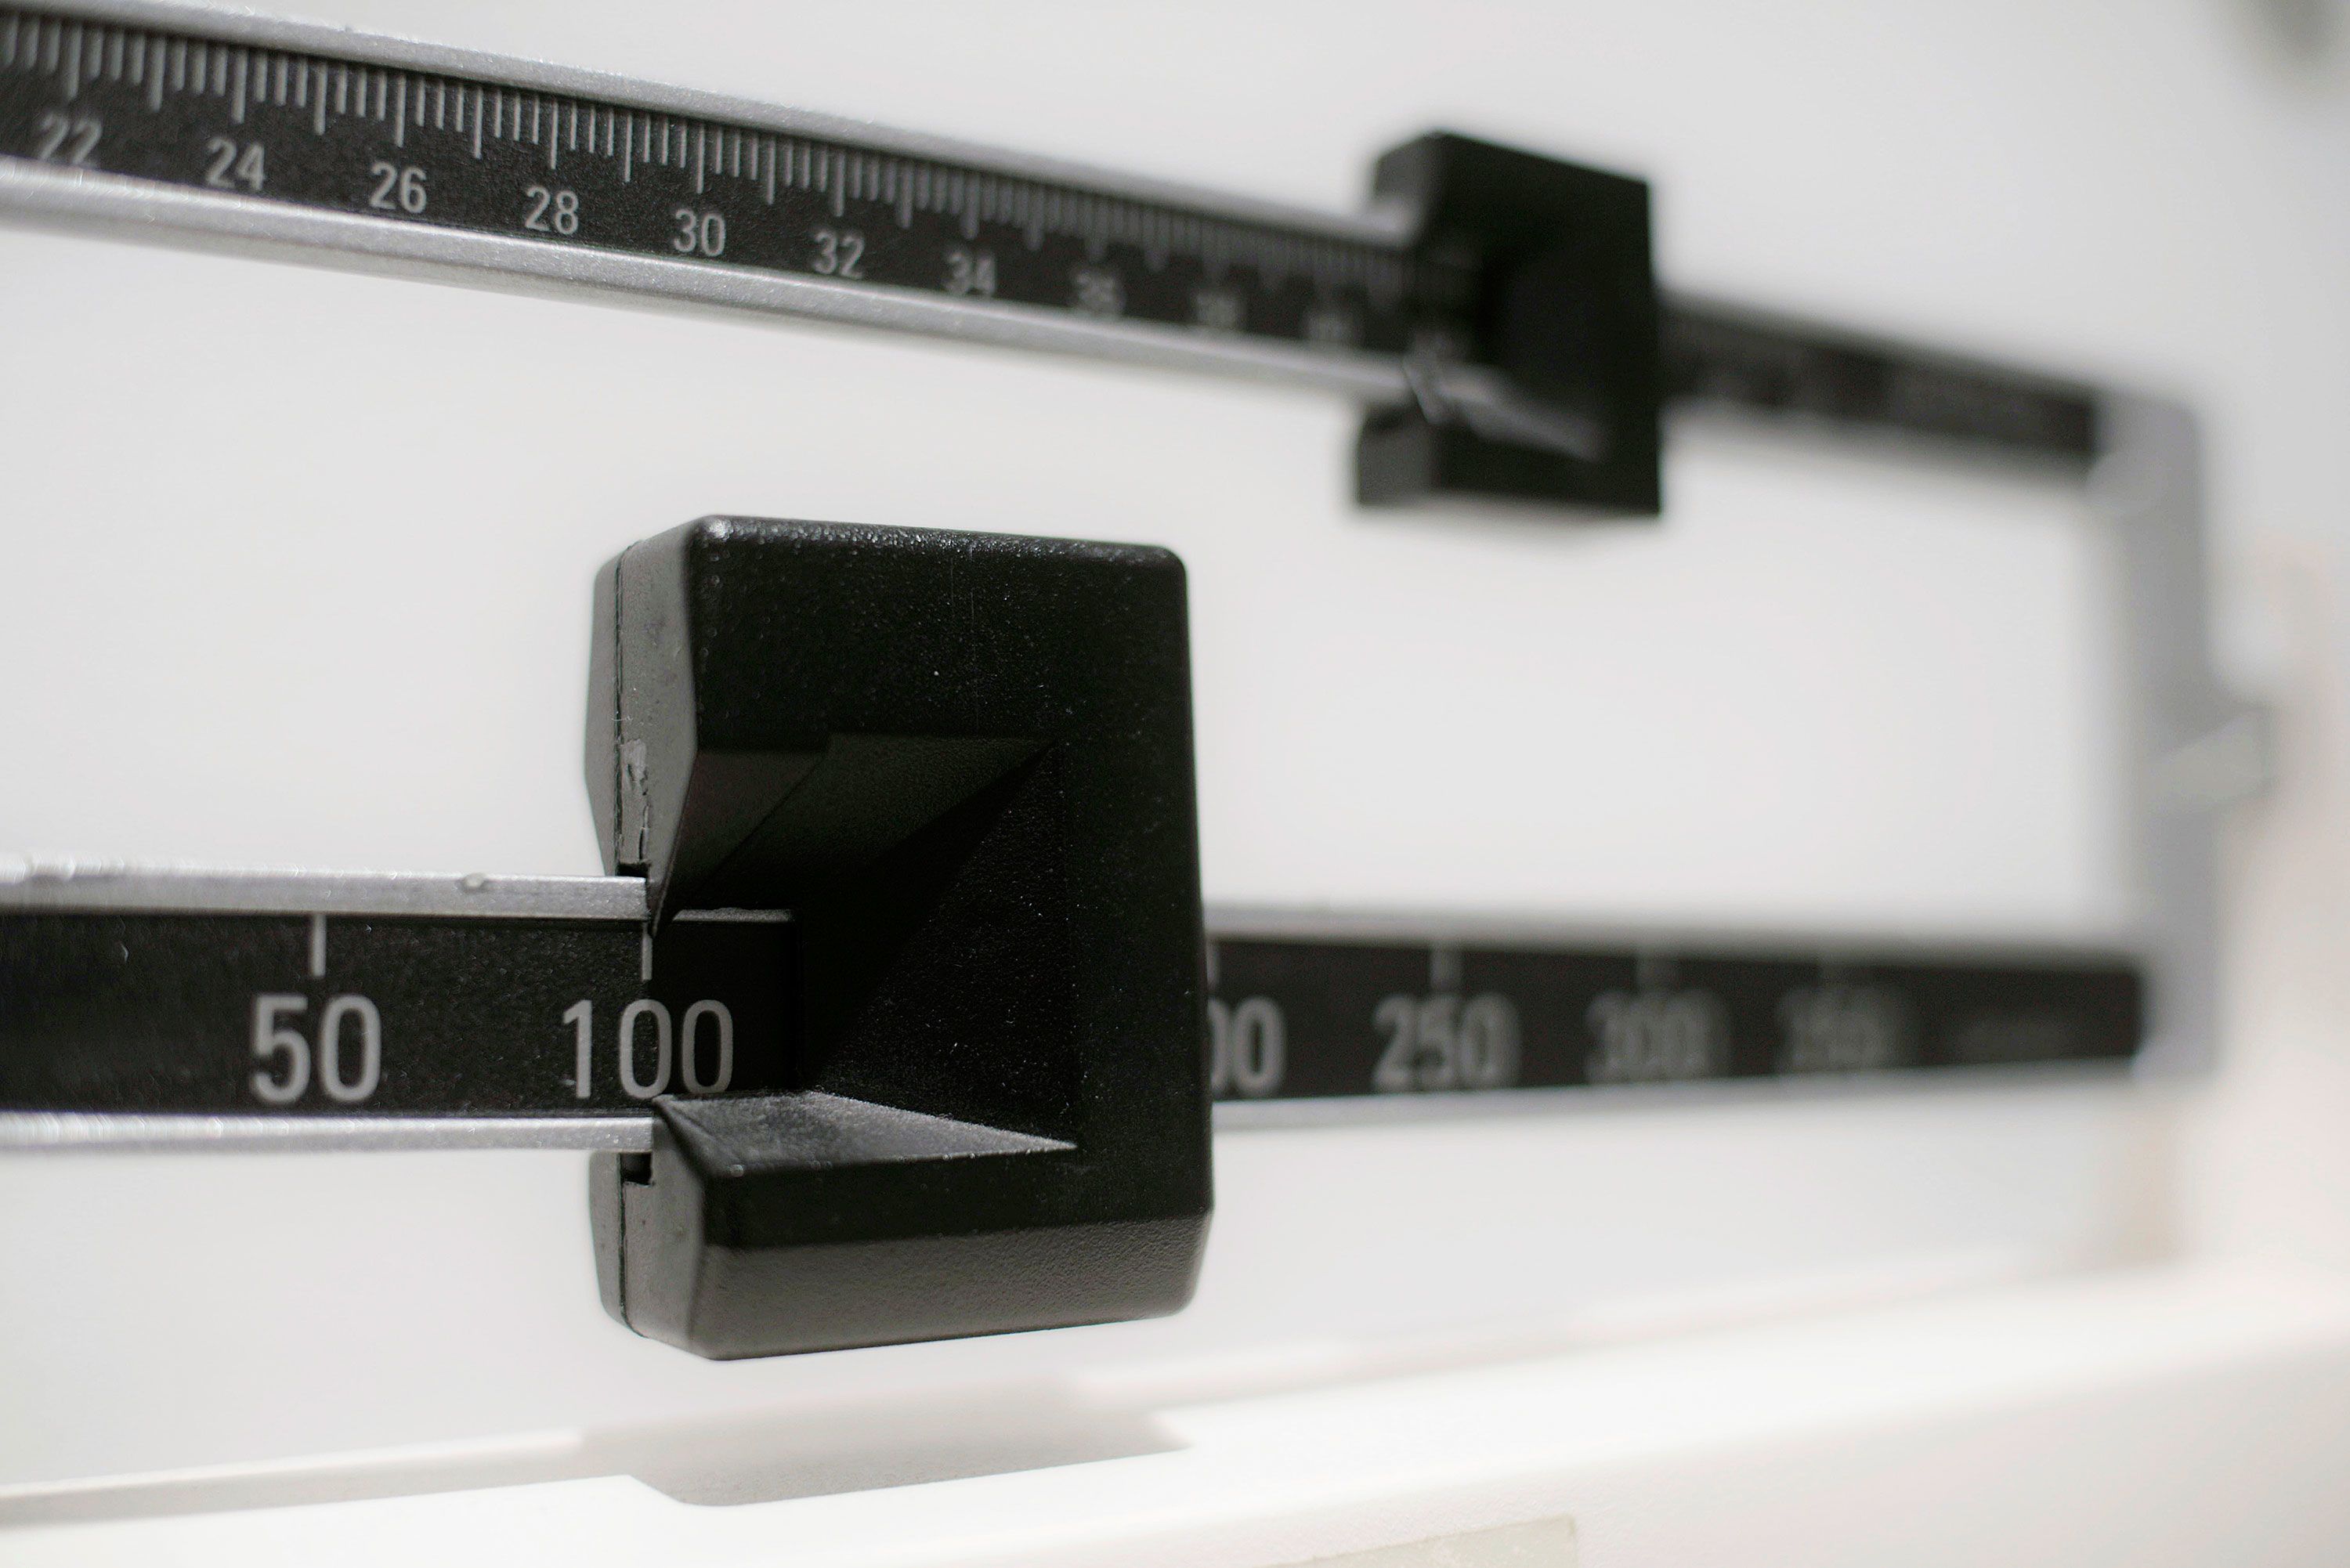 BMI: Doctors urged to move beyond body mass index as a lone measure of  health